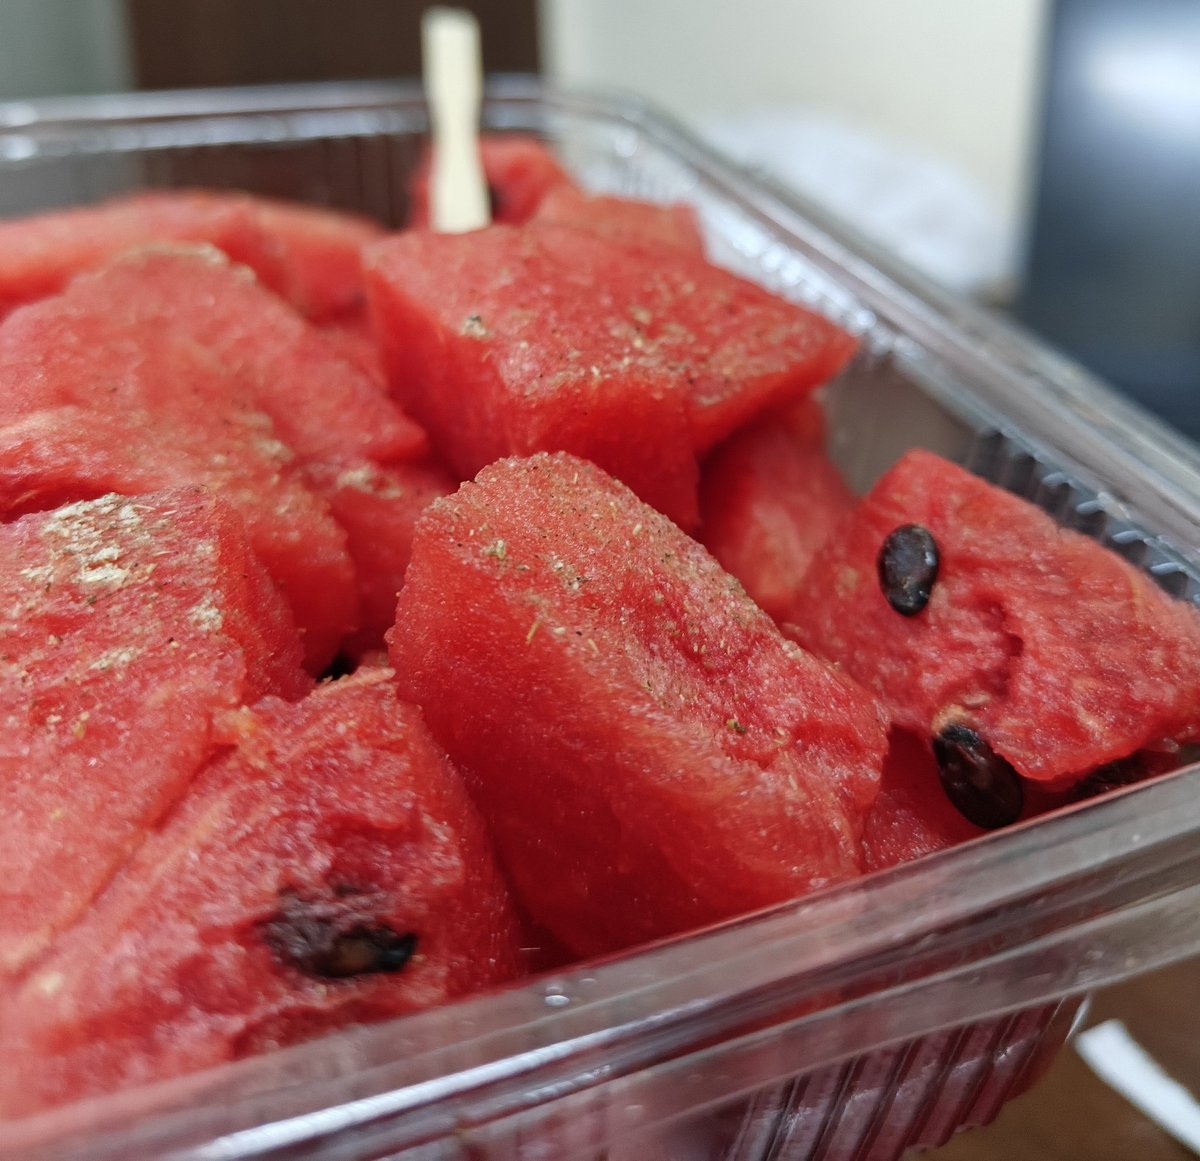 Mangoes are never overrated but Watermelons Deserve Almost Equal Status!
#SummerVibes 
#Watermelons